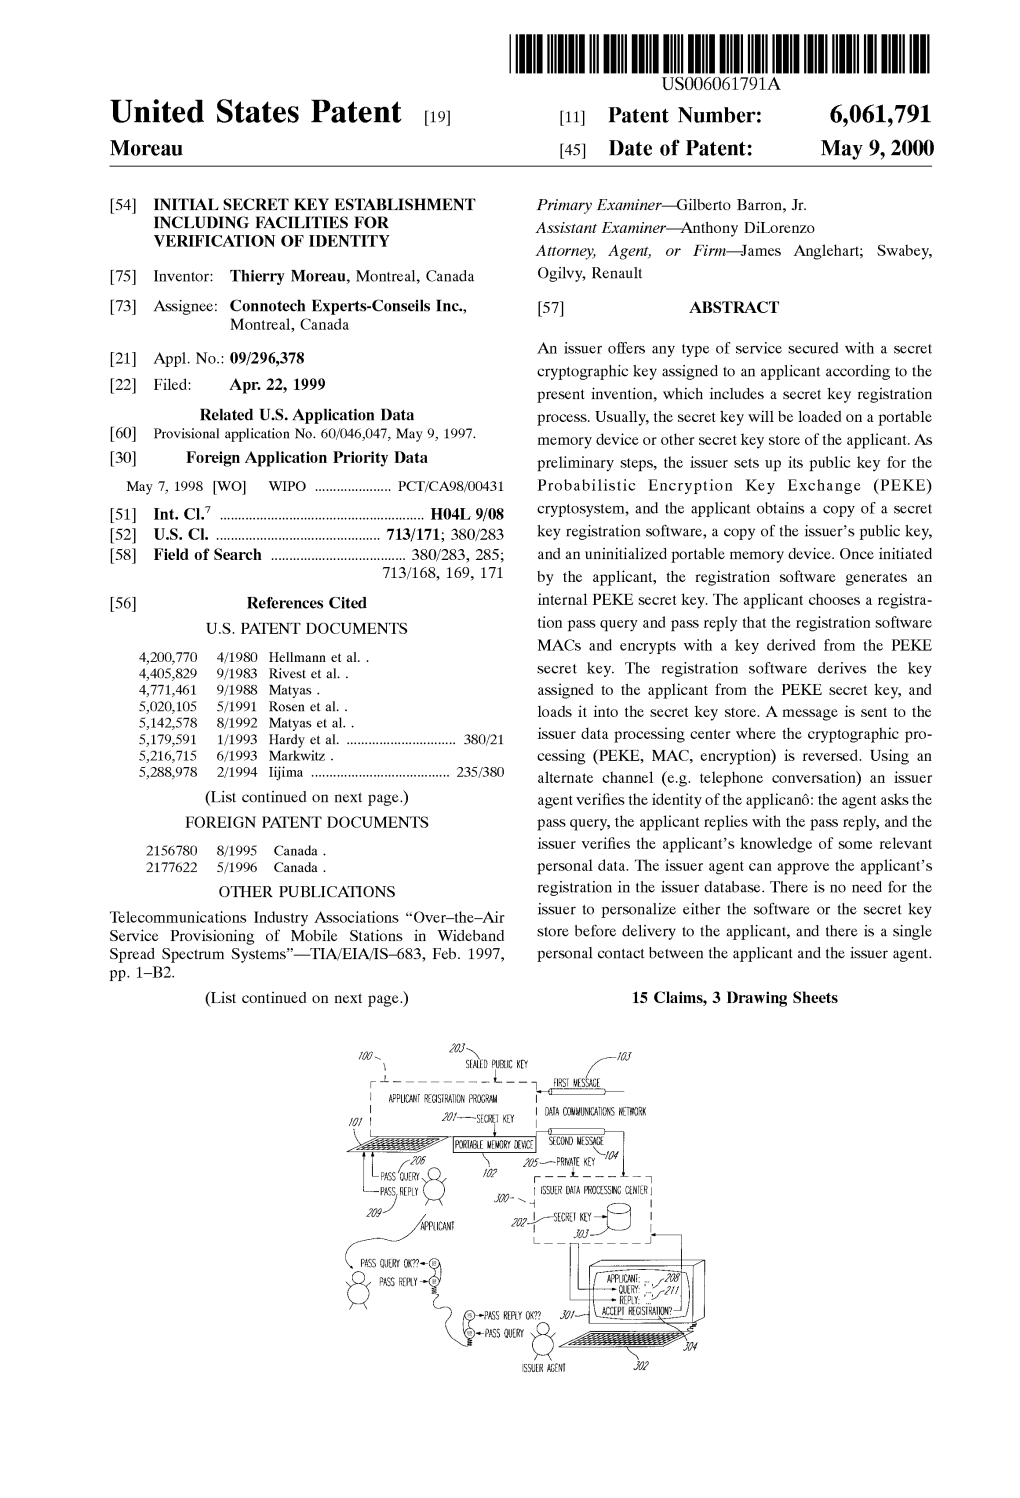 United States Patent (19) 11 Patent Number: 6,061,791 Moreau (45) Date of Patent: May 9, 2000